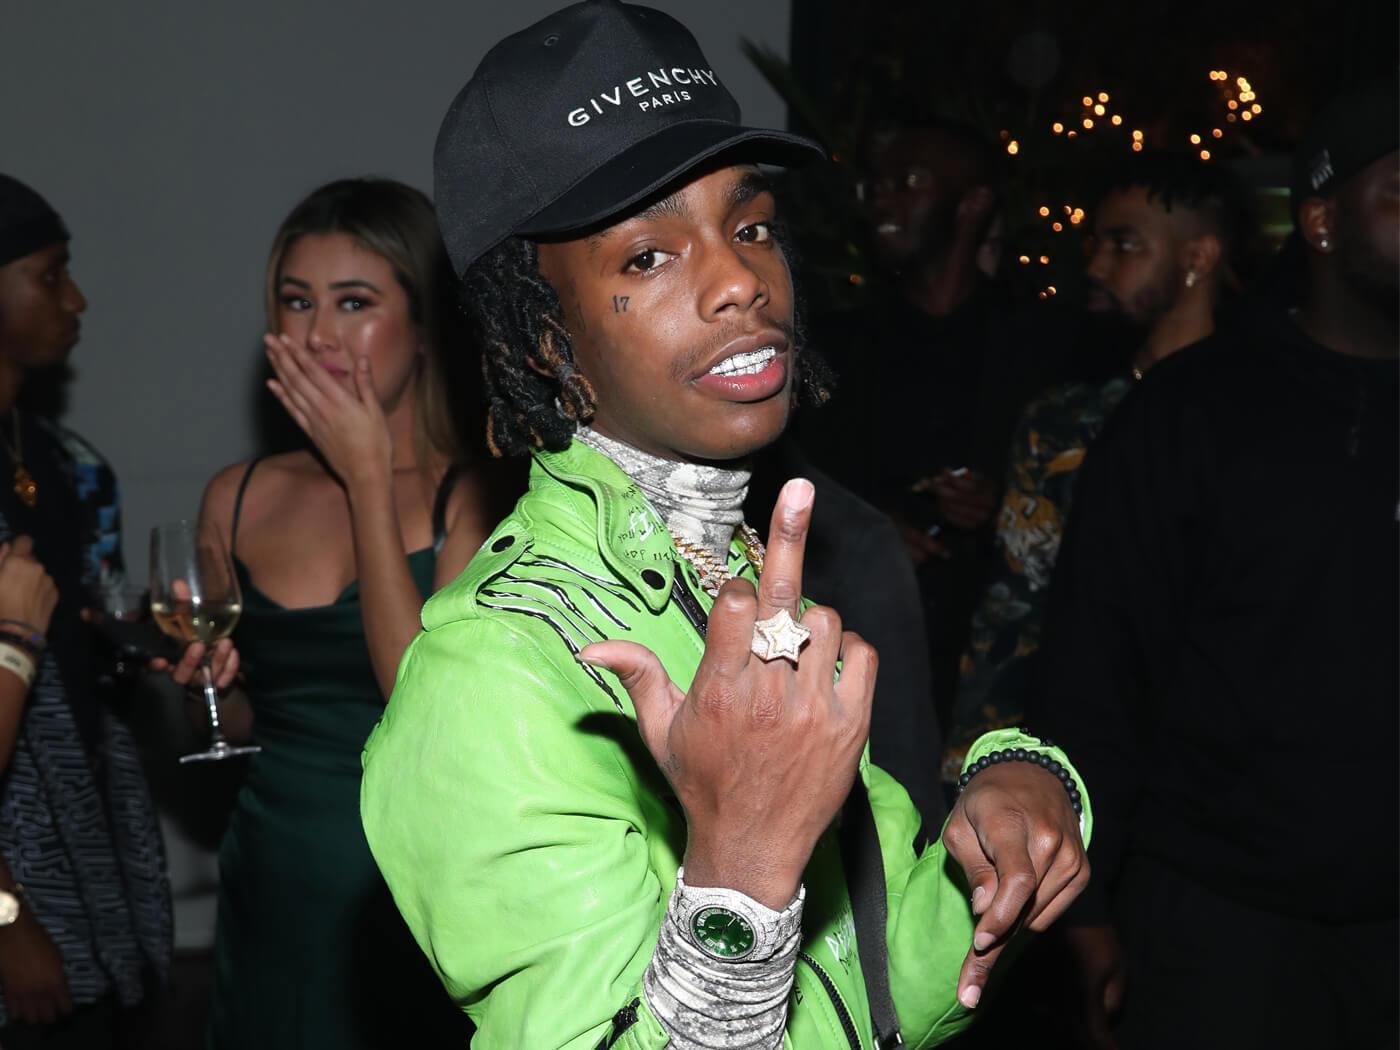 YNW Melly drops “Suicidal” remix featuring Juice WRLD